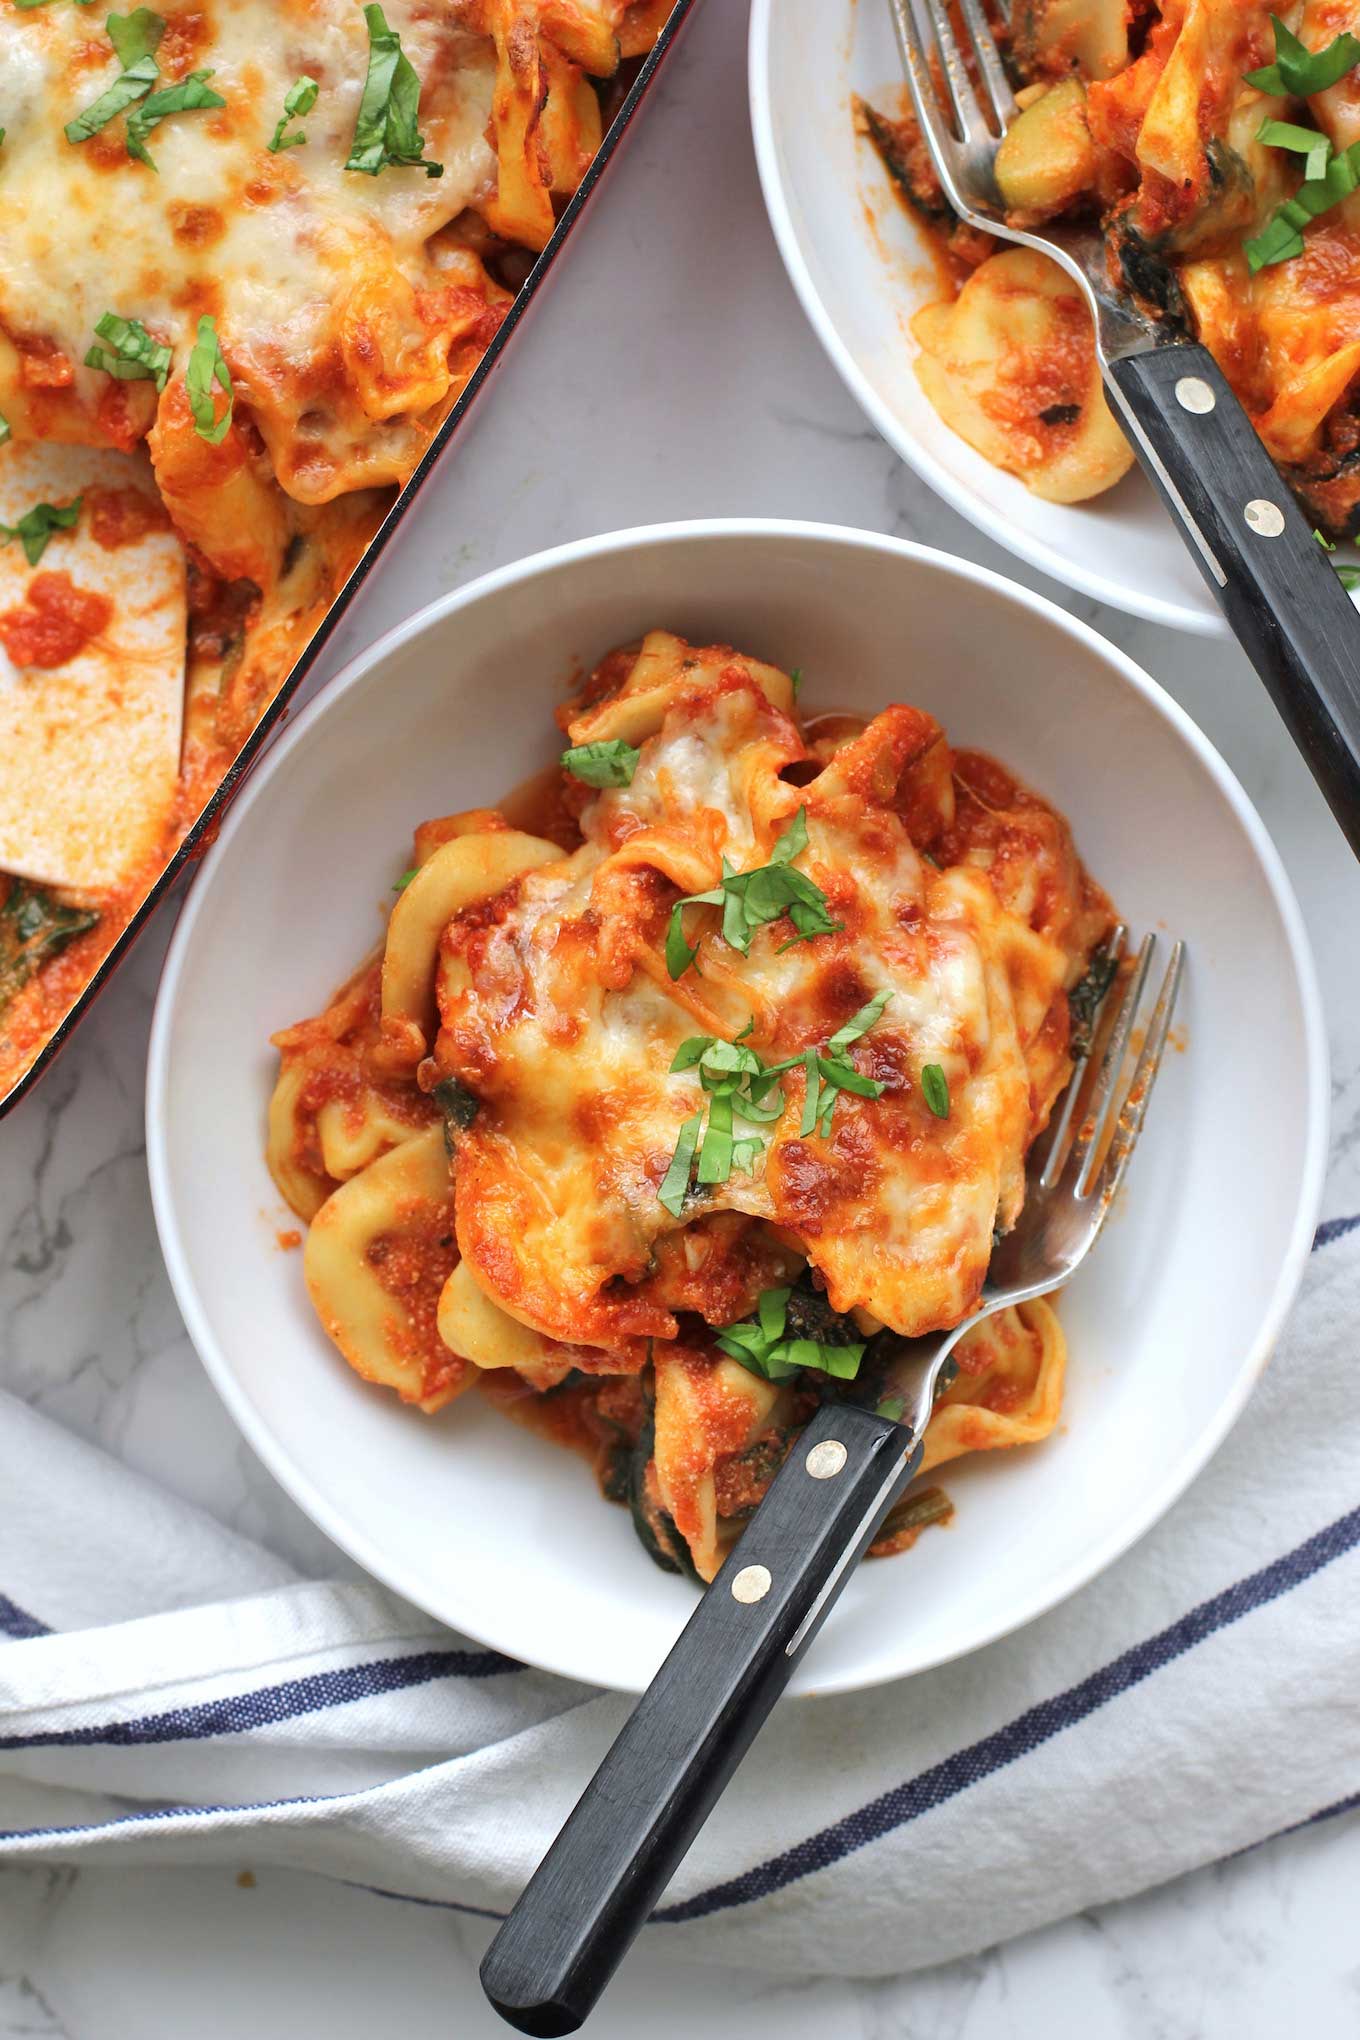 Baked Tortellini in a white bowl with a fork.